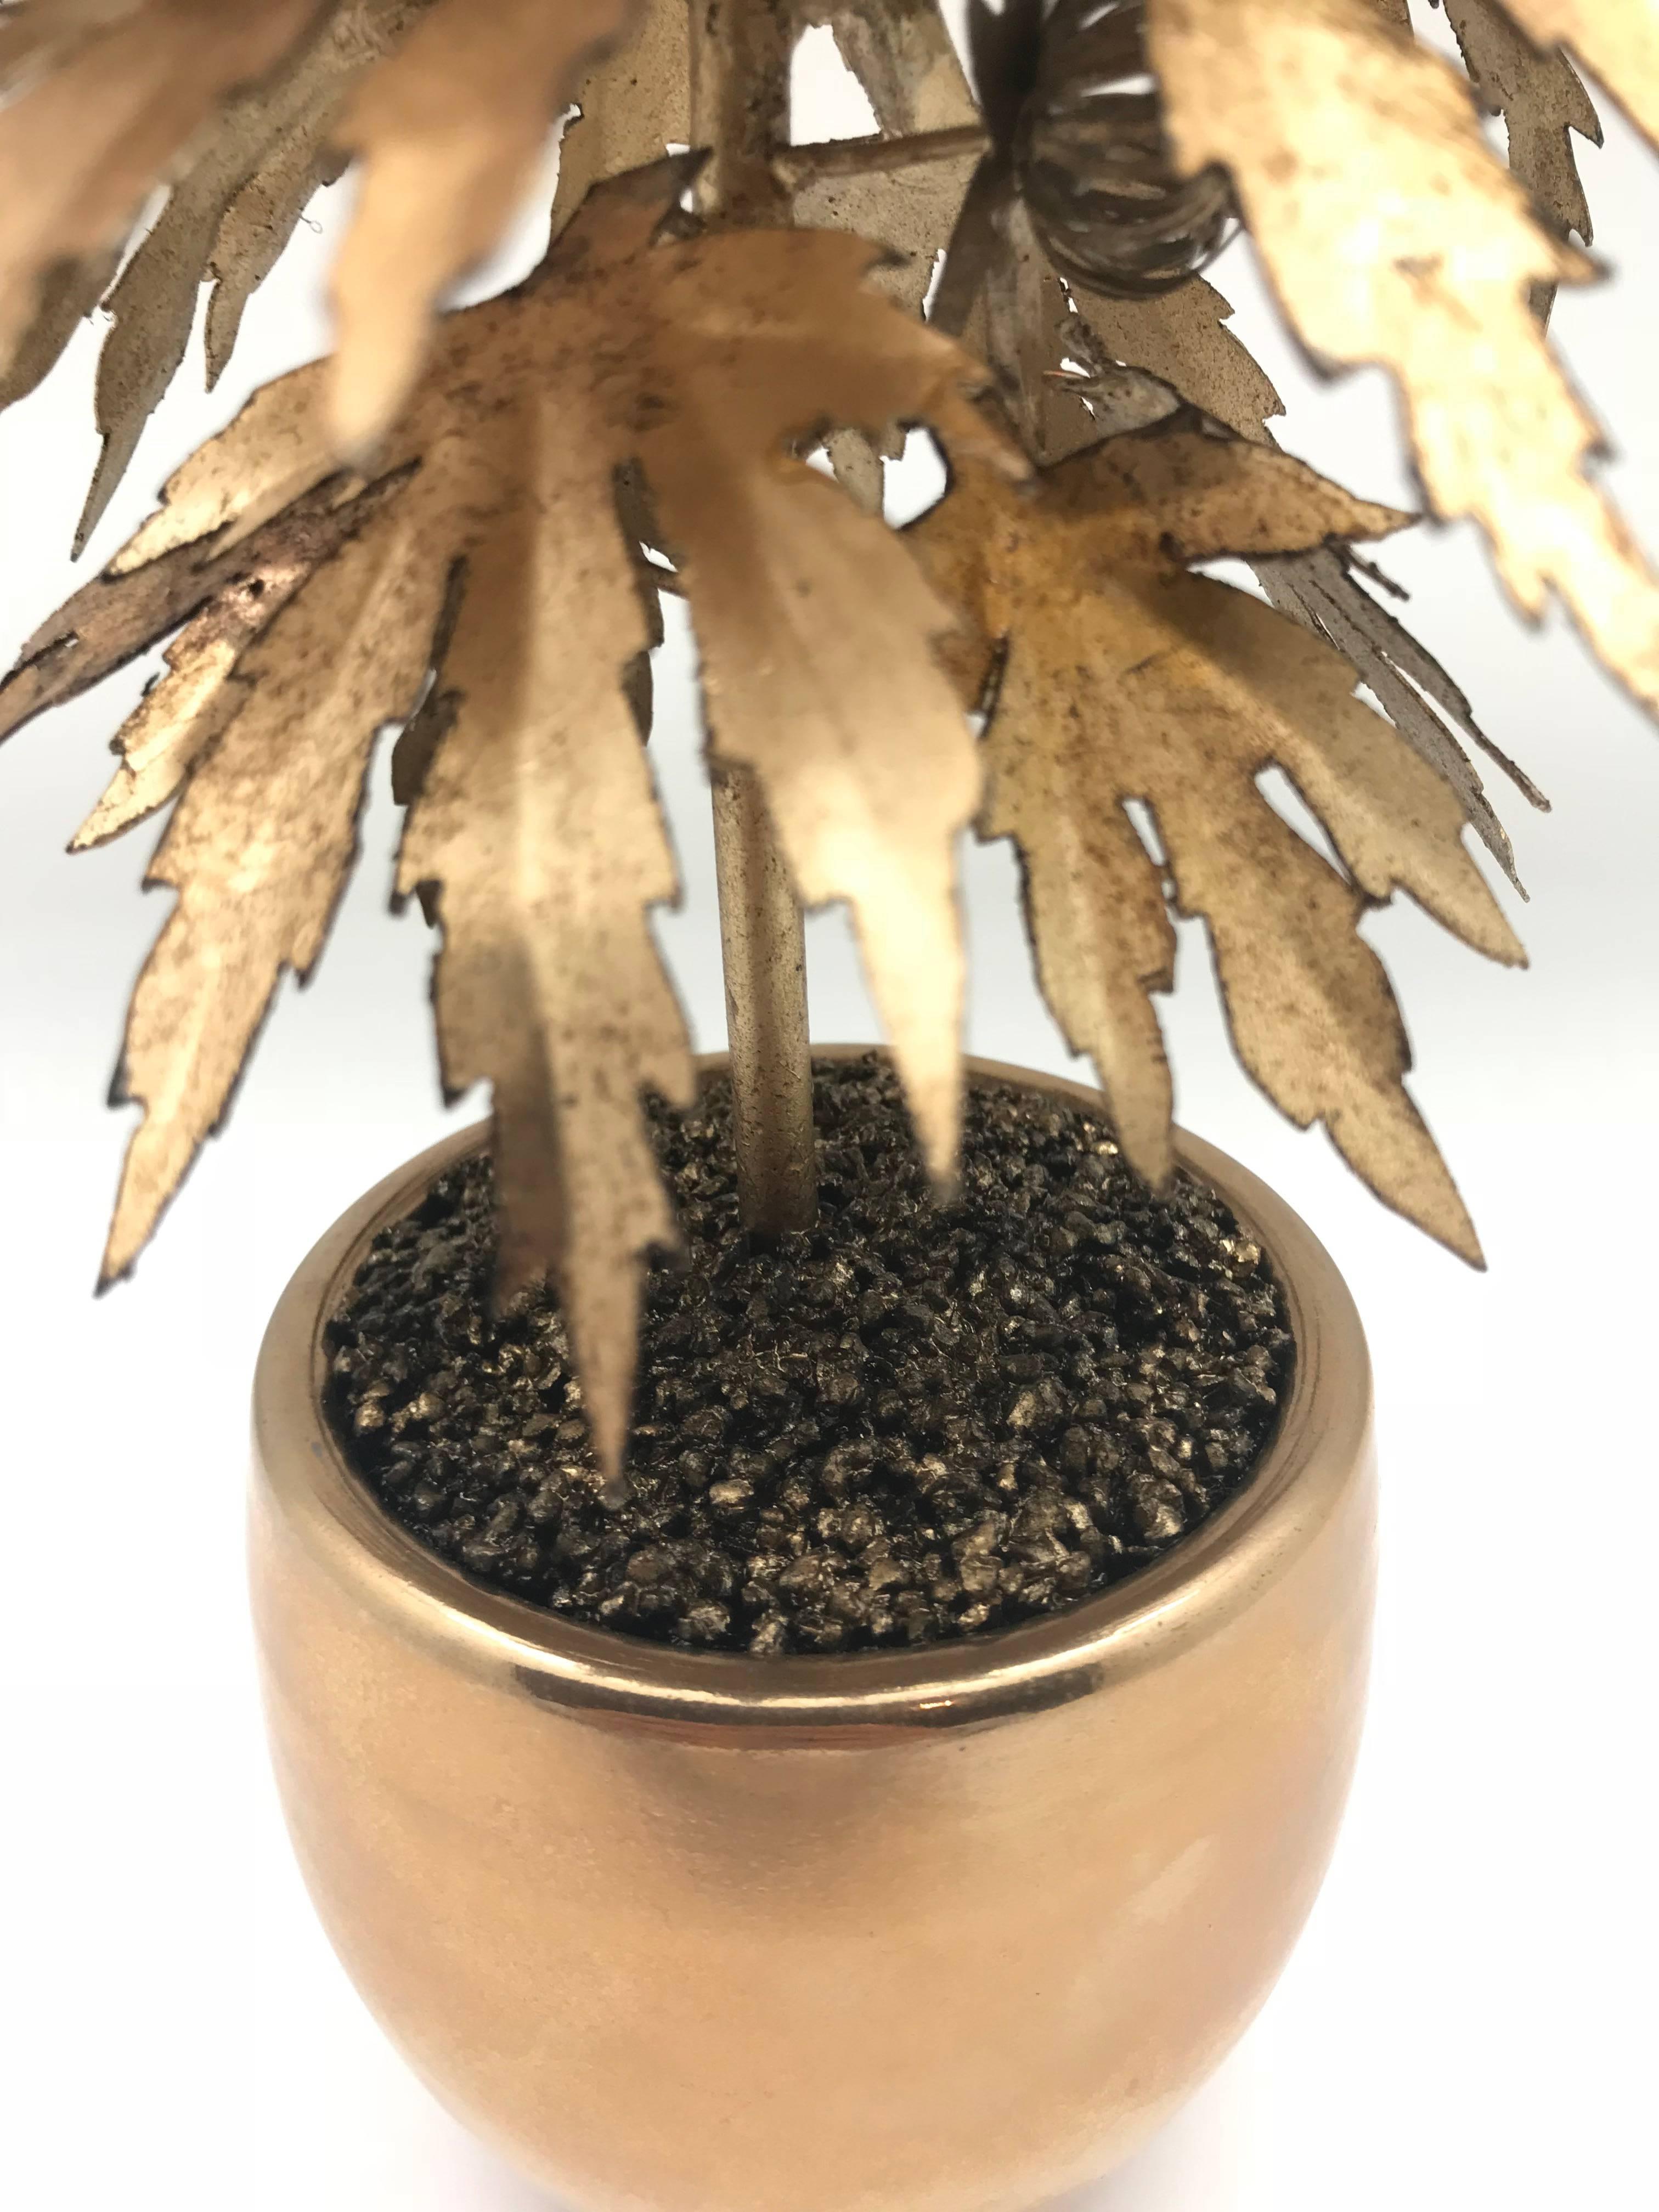 Park Avenue pot plant! Beautifully gilded tole marijuana or cannabis plant in a silvered ceramic pot with several large buds.